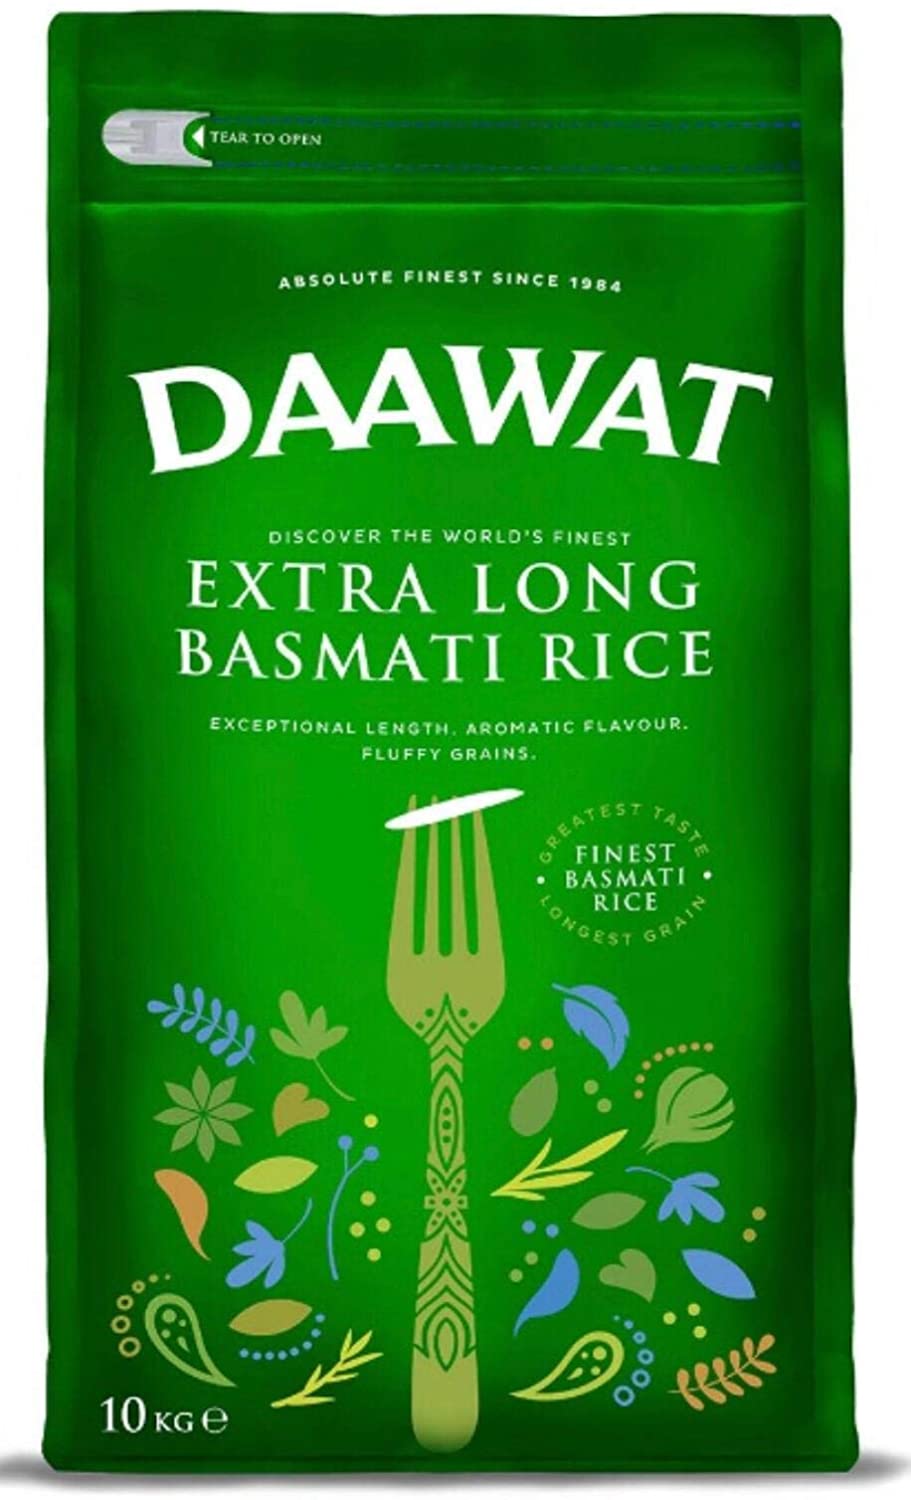 Daawat Extra Long Basmati Rice 10kg SPECIAL OFFER